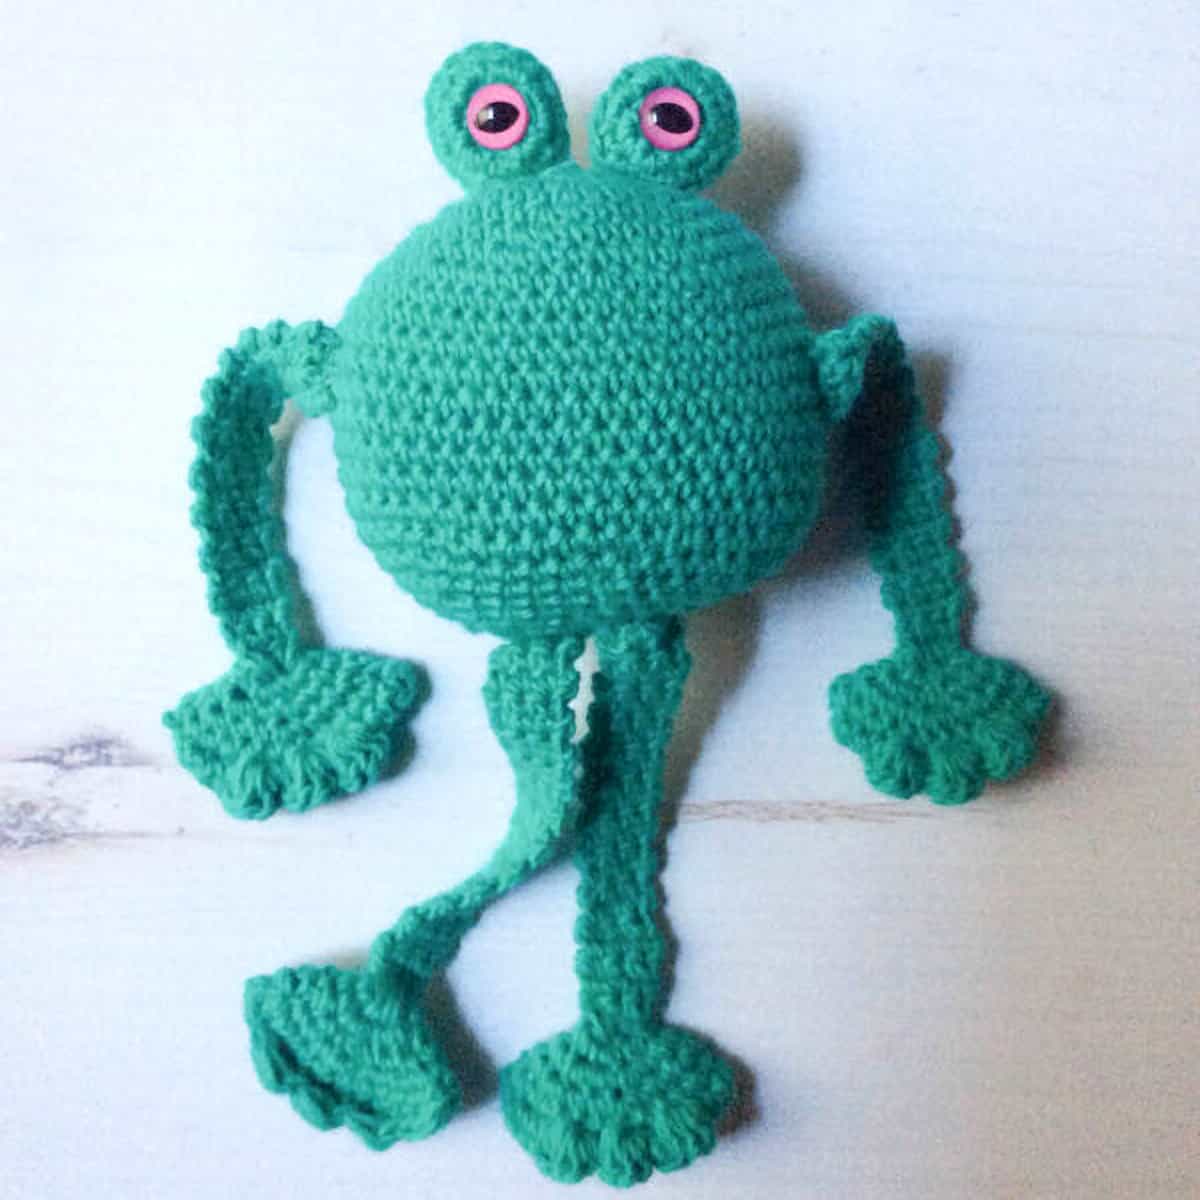 Crocheted frog with long arms and legs.